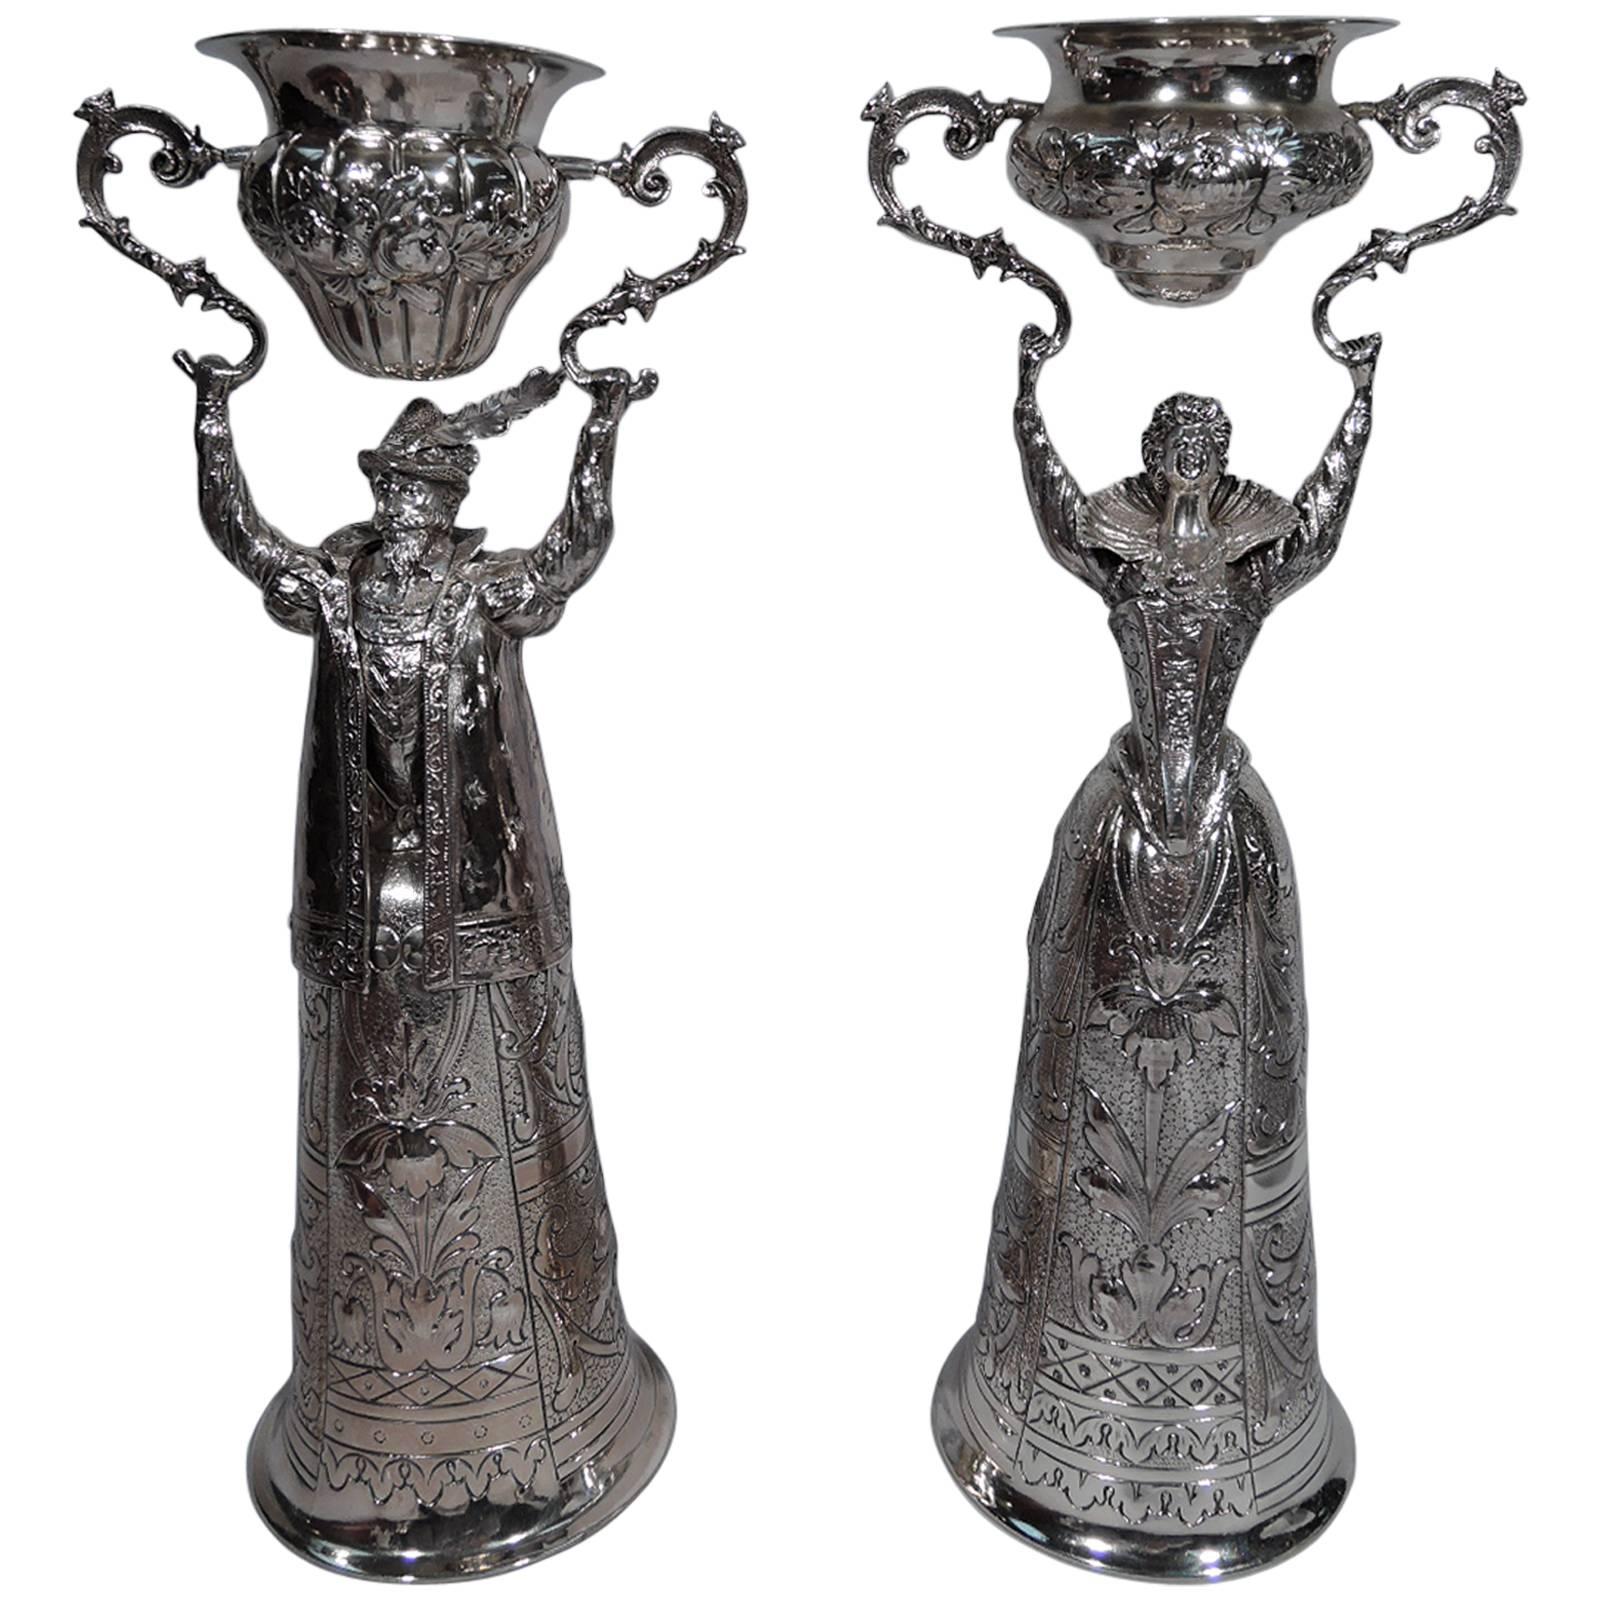 Pair of German Sterling Silver Wedding Cups in Form of Renaissance Man & Woman